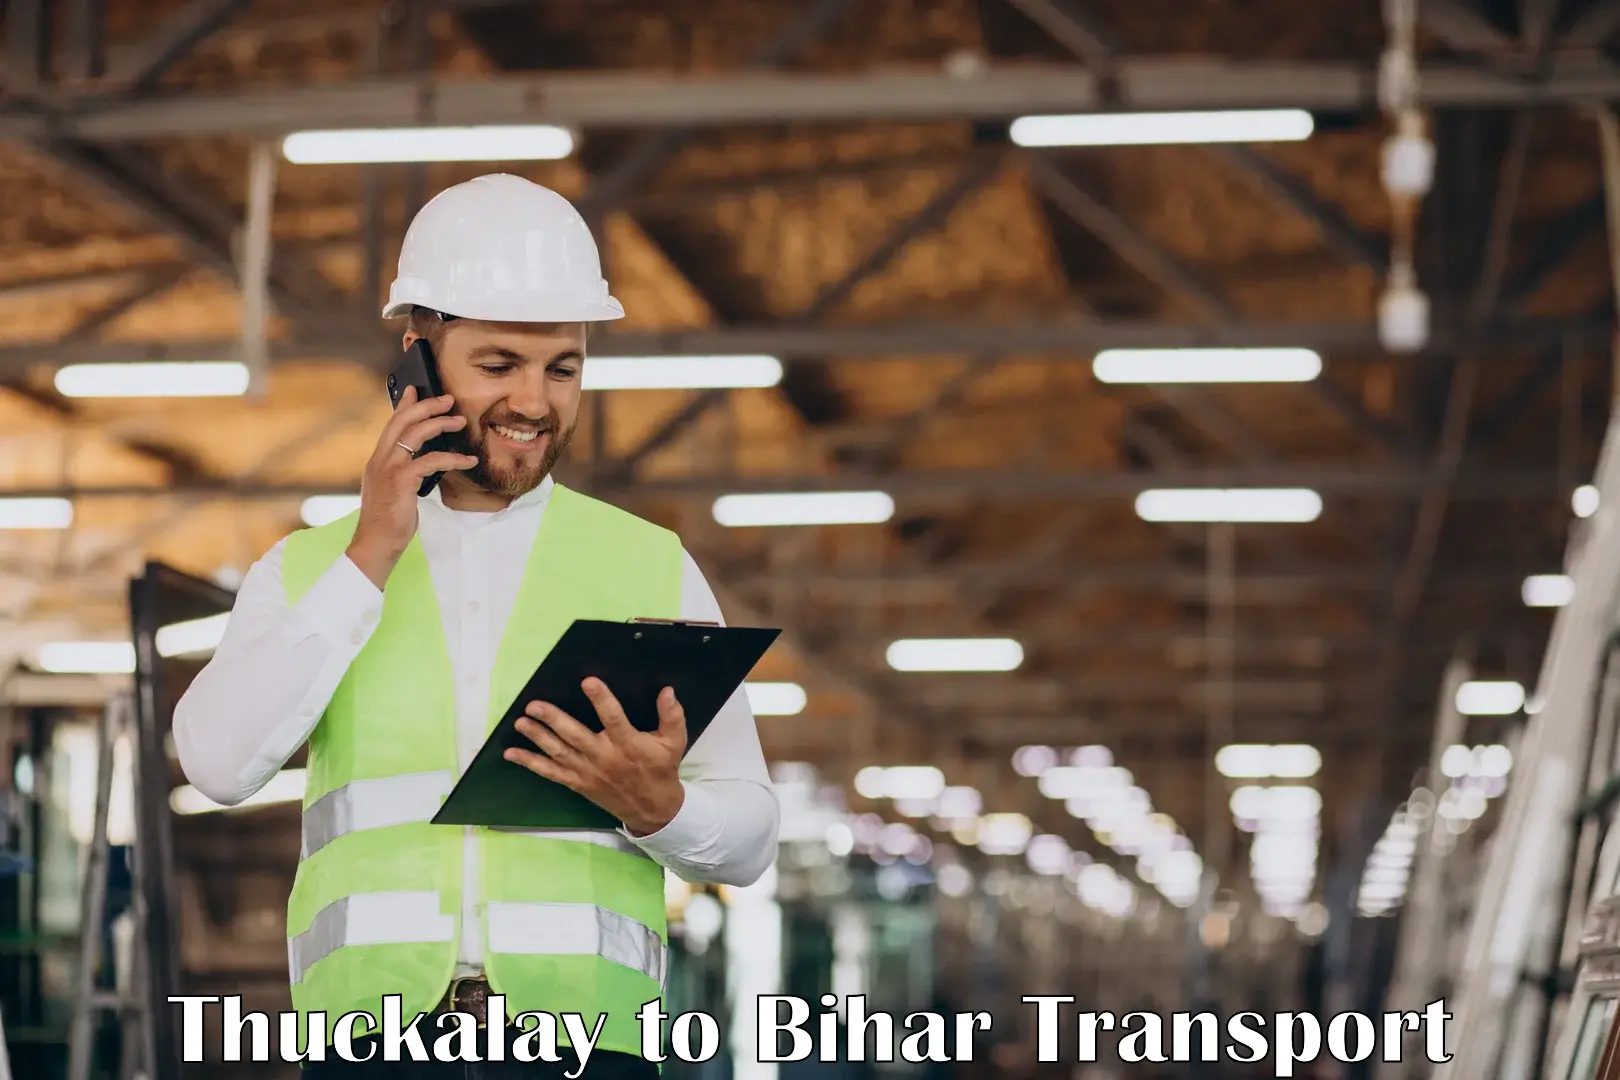 Pick up transport service in Thuckalay to Bihta